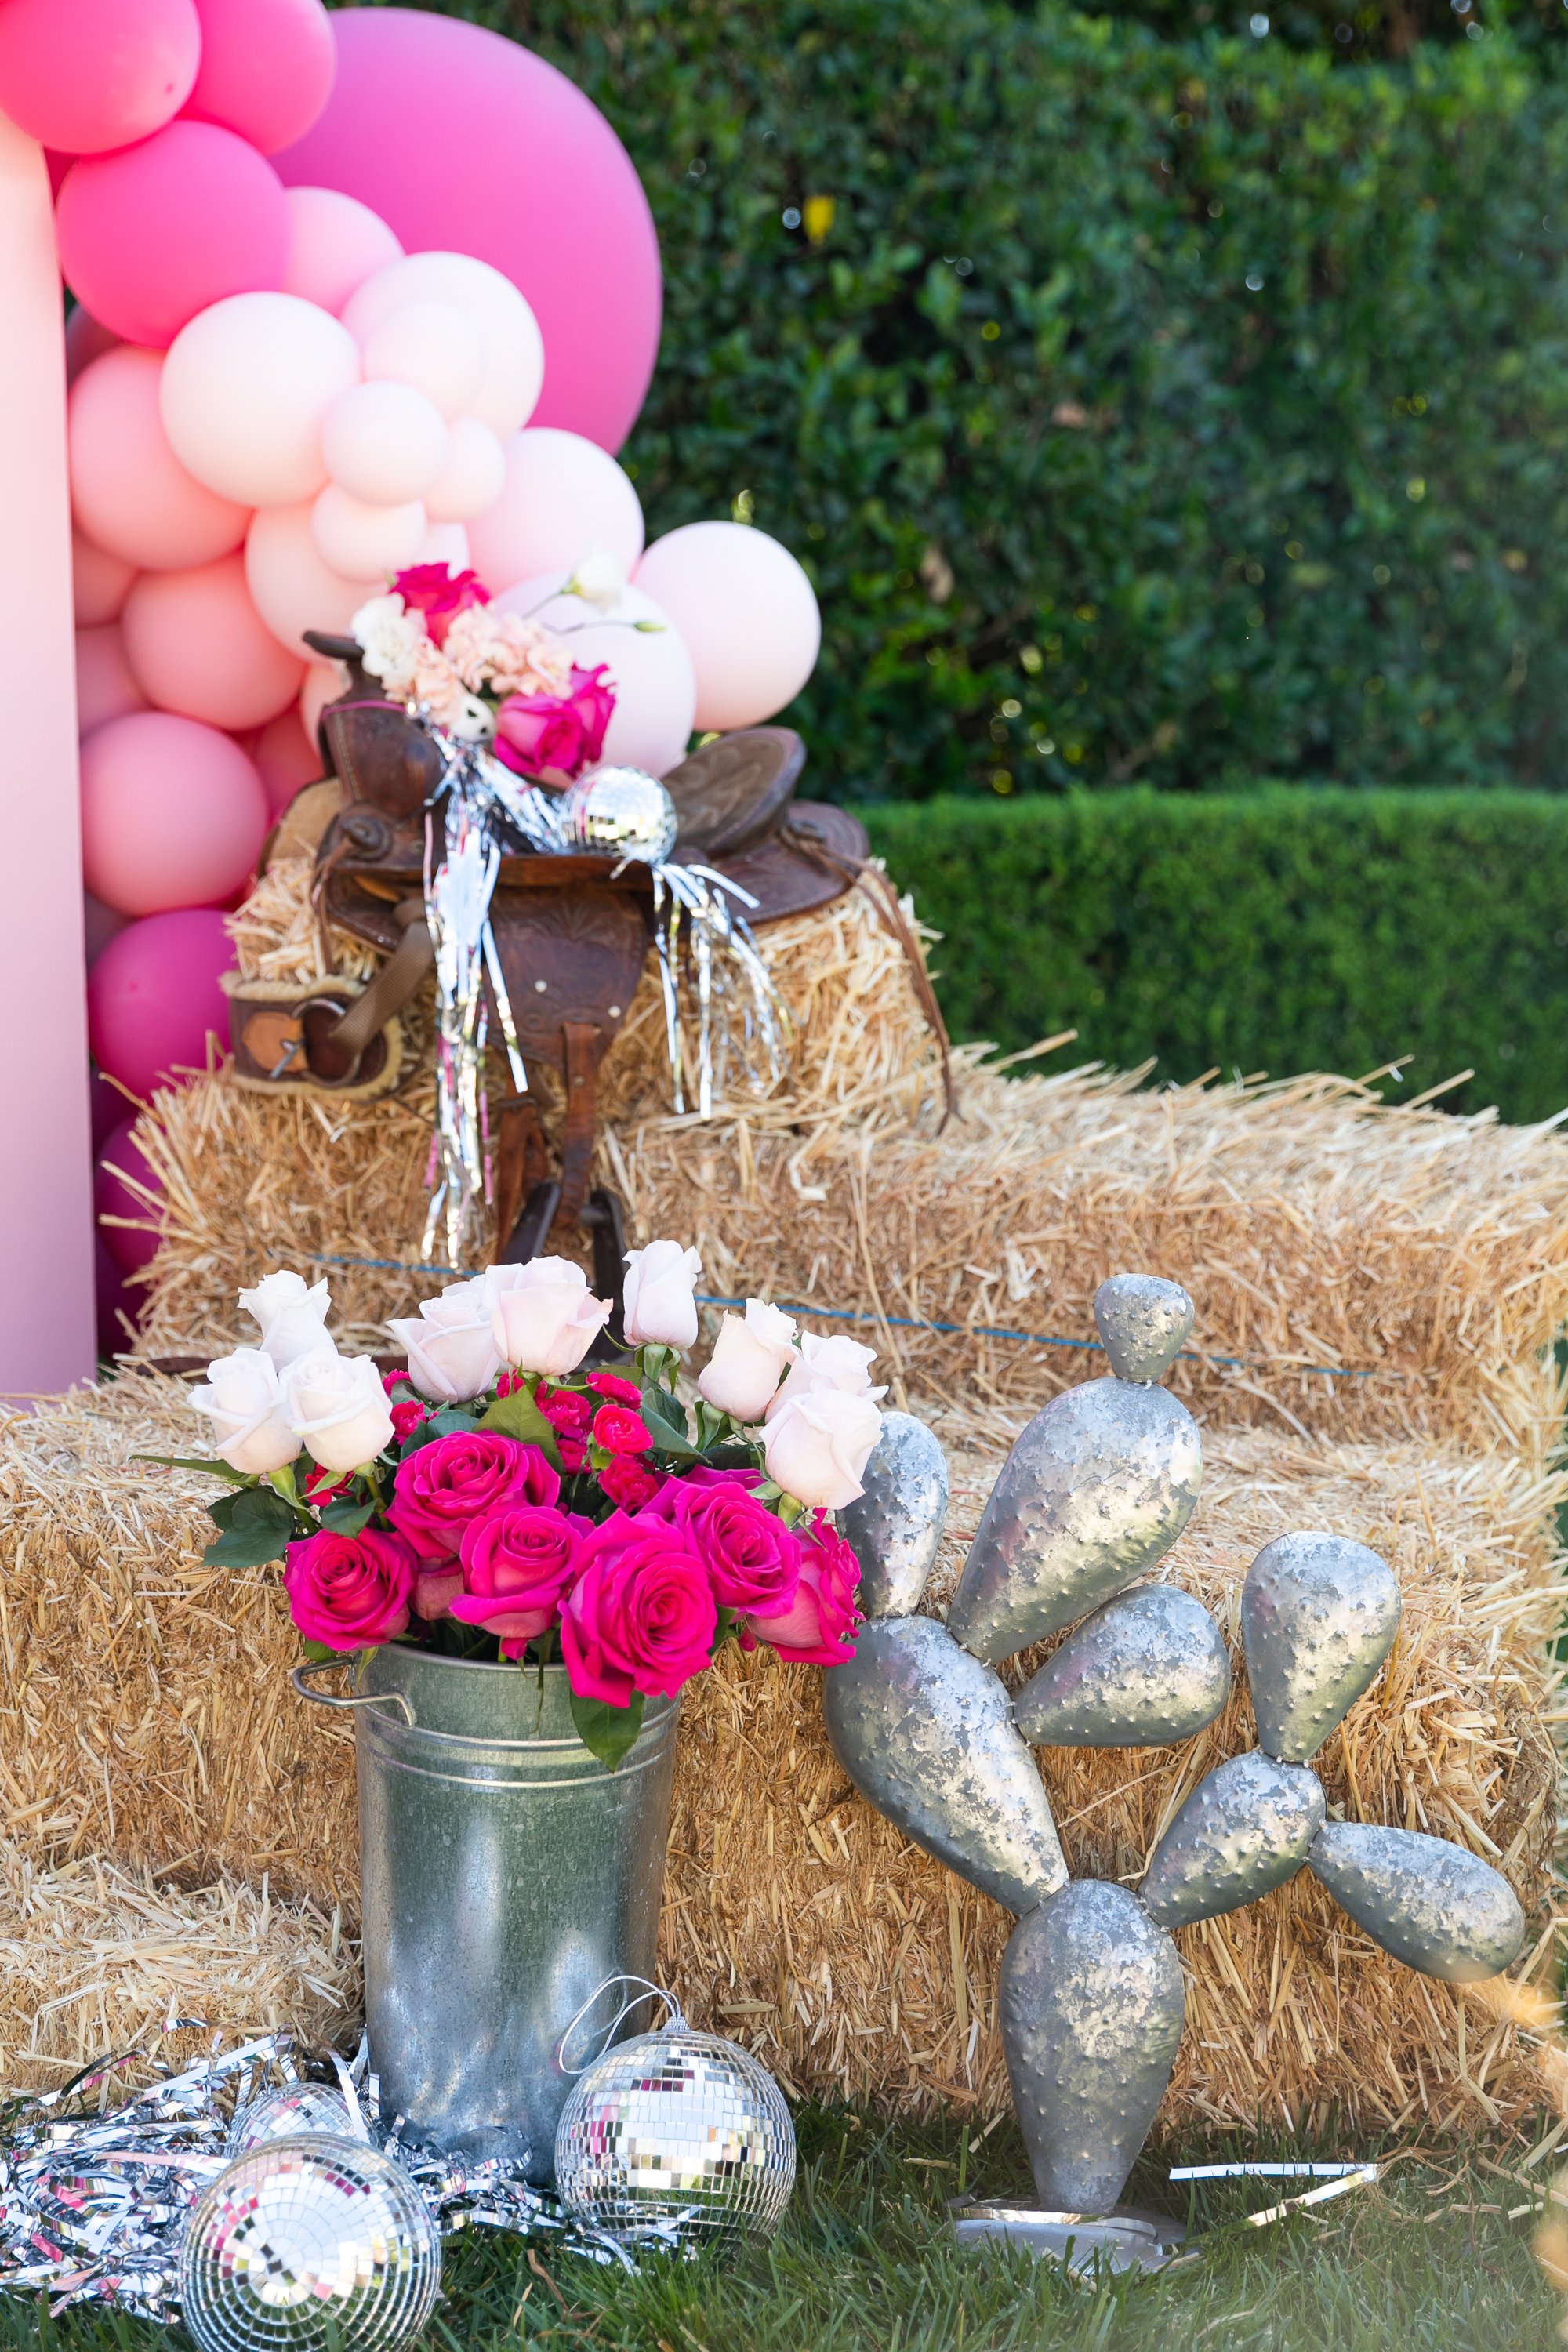 Los_Angeles_Party_Photographer_Luxury_Event_First_Birthday_Baby_Sherwood_Beverly_Hills_Cowboy_Disco_Theme_Girl_Child_Family_Photography-0005.jpg